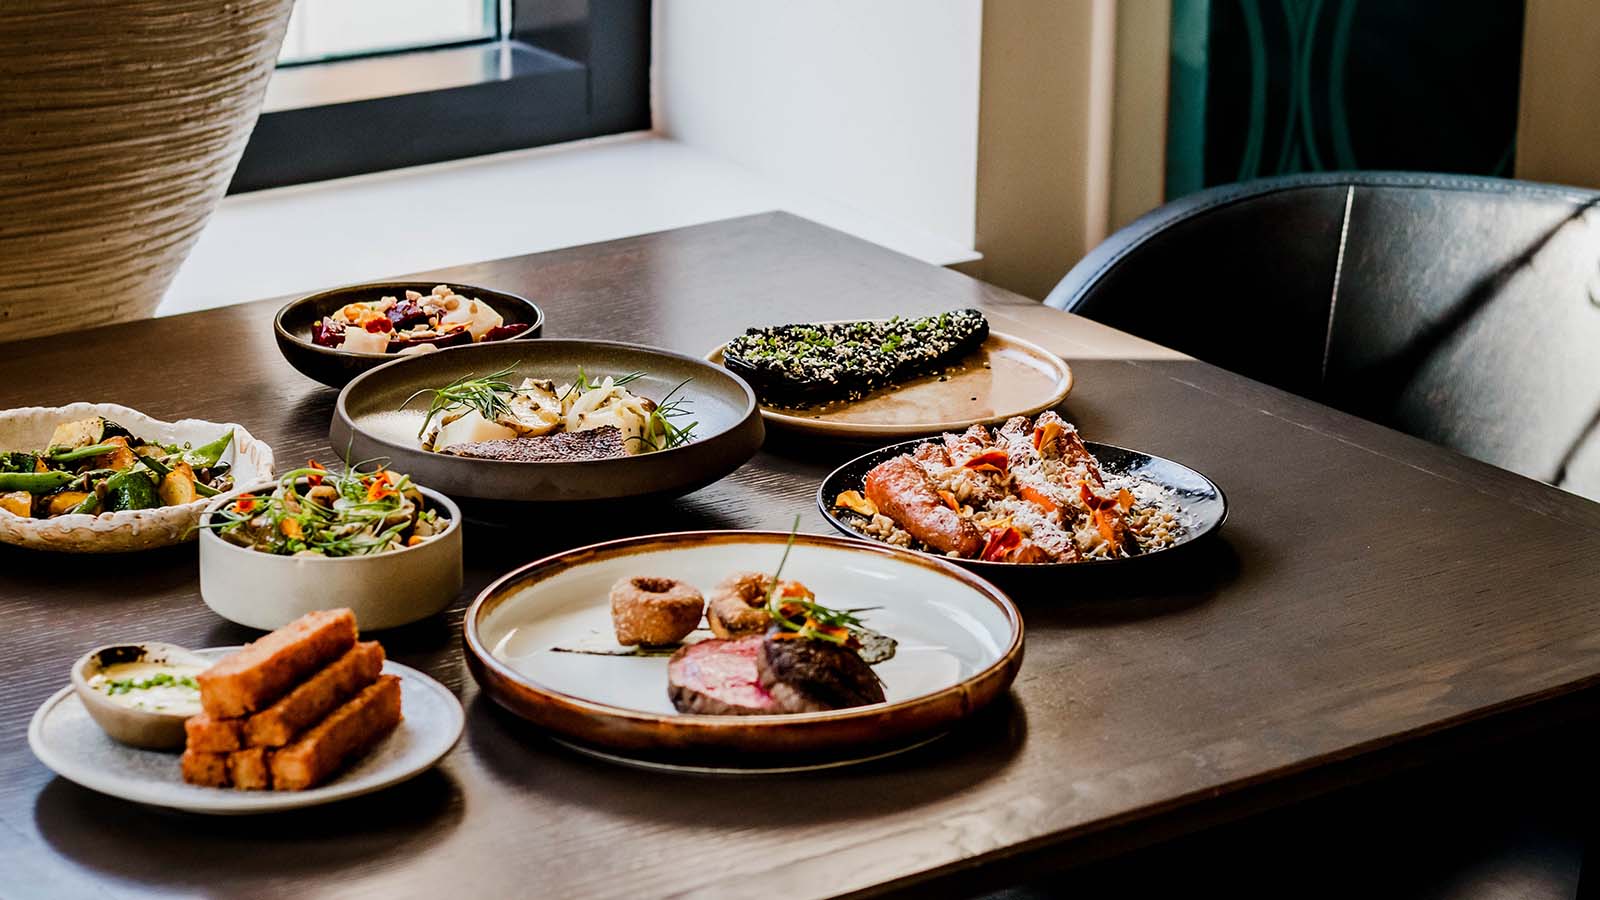 Spread of local, seasonal dishes at The Courtney Room